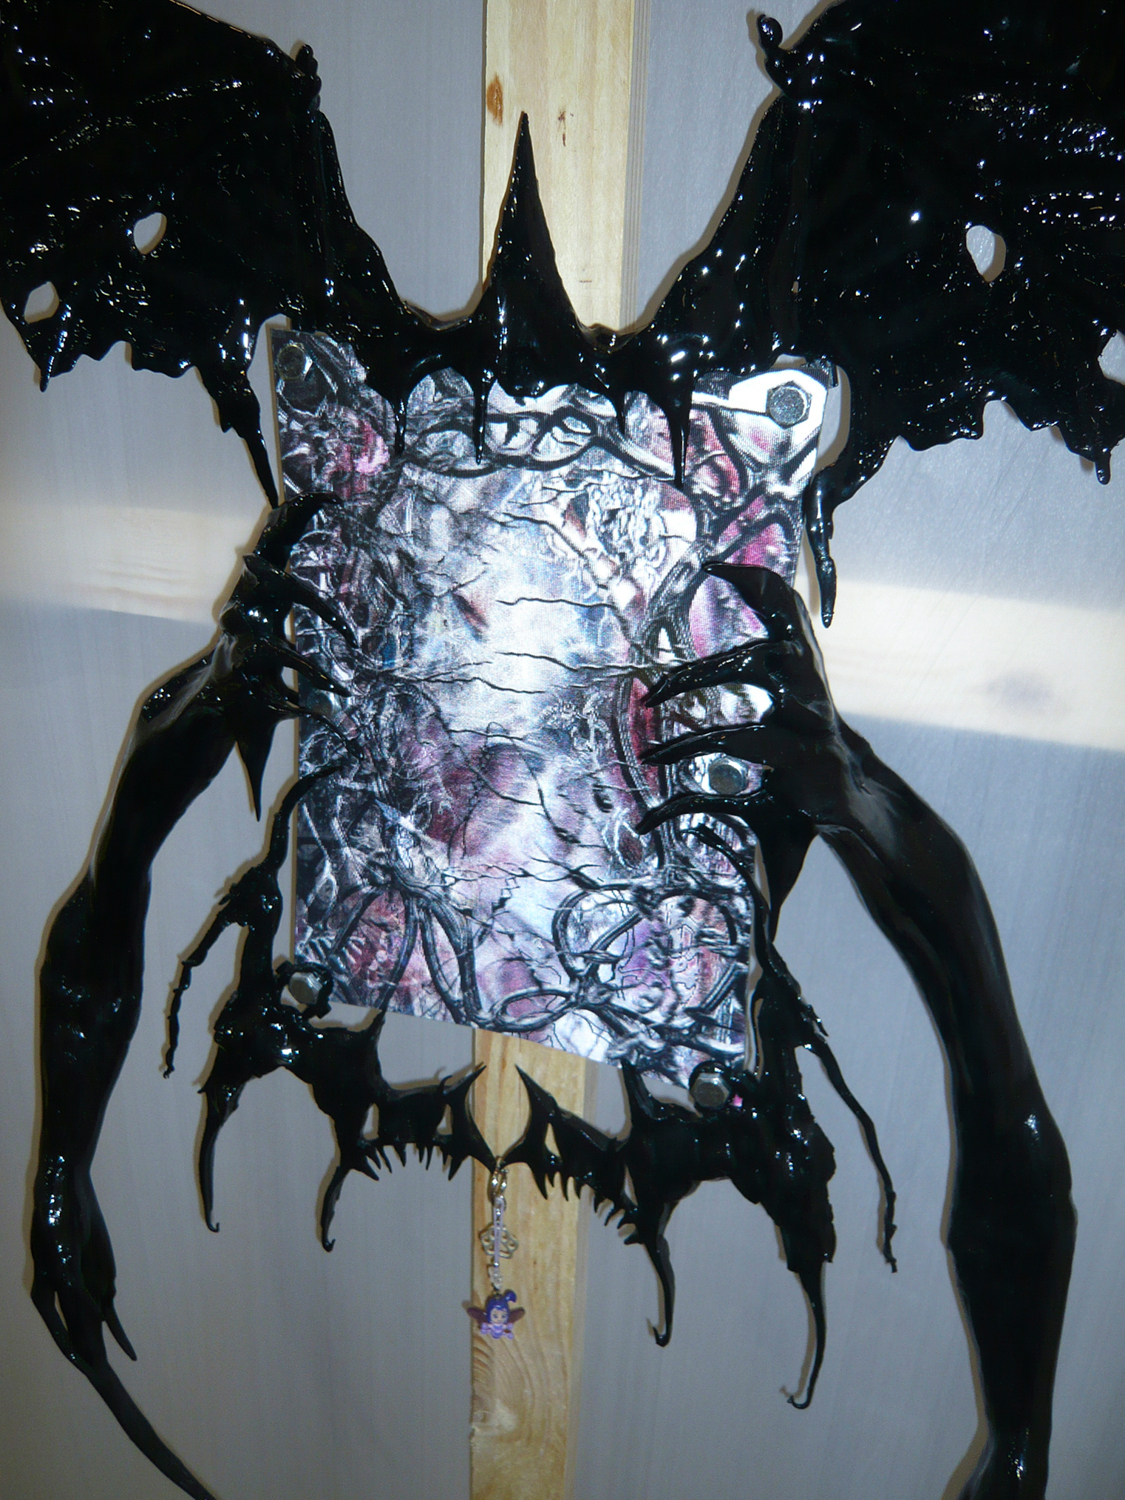 Mutant, 2022, lenticular print and epoxy-coated ornaments